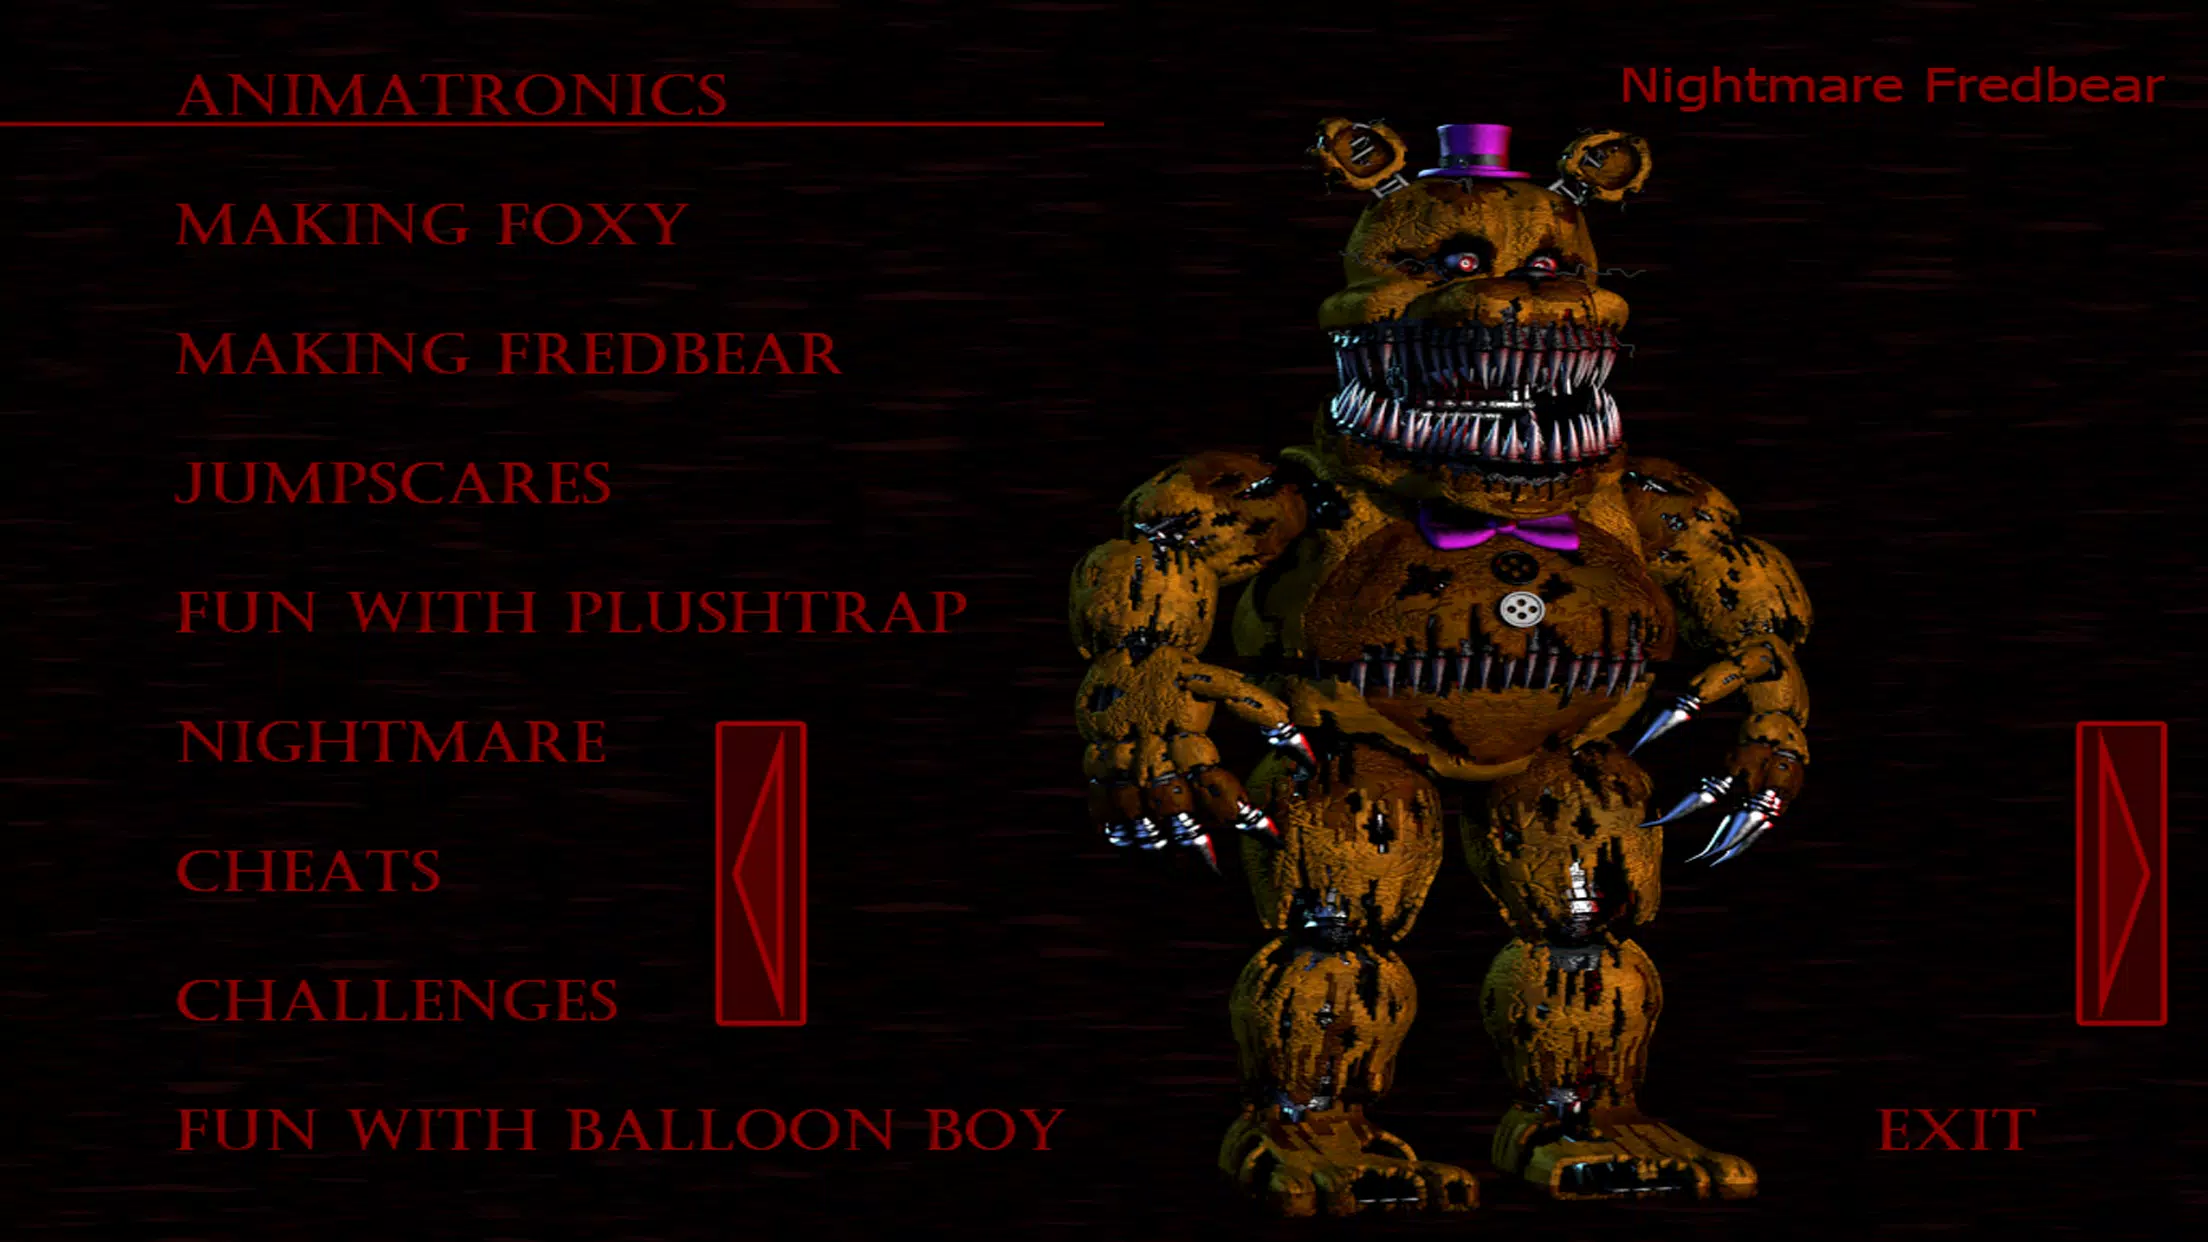 Download Five Nights at Freddy's 4 v2.0.2 APK on Android free